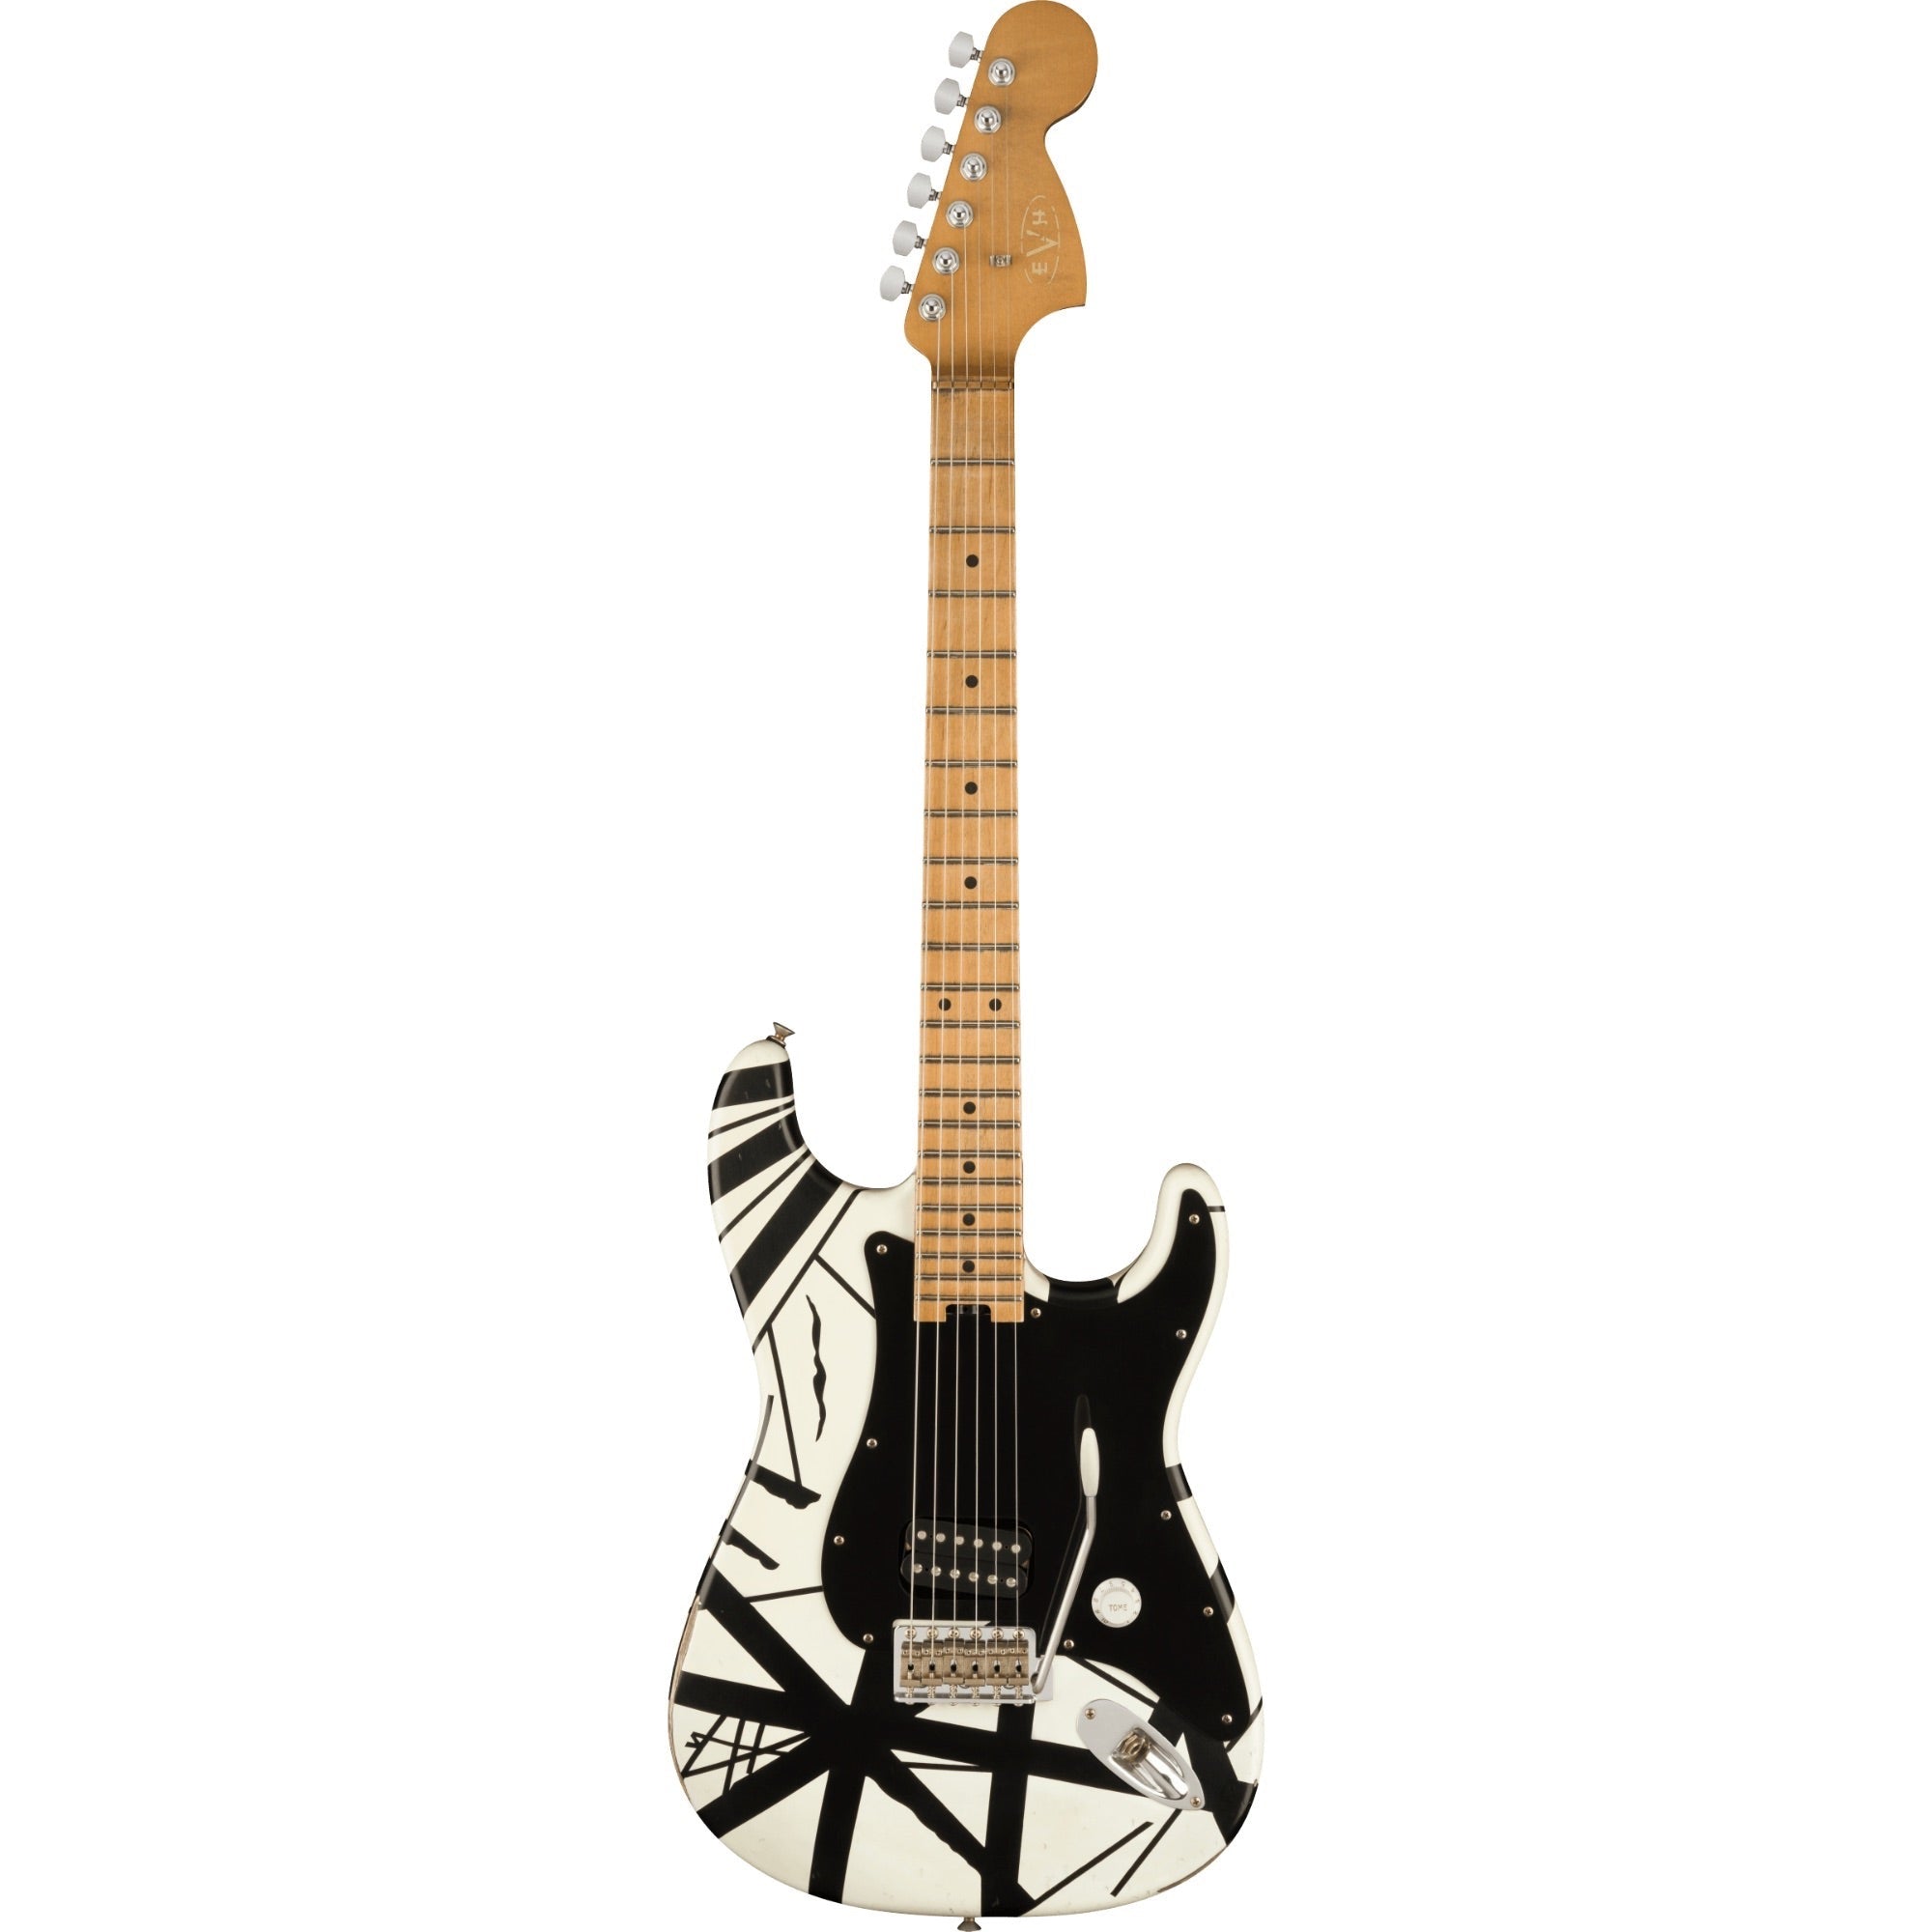 EVH Striped Series '78 Eruption Guitar, White with Black Stripes Relic